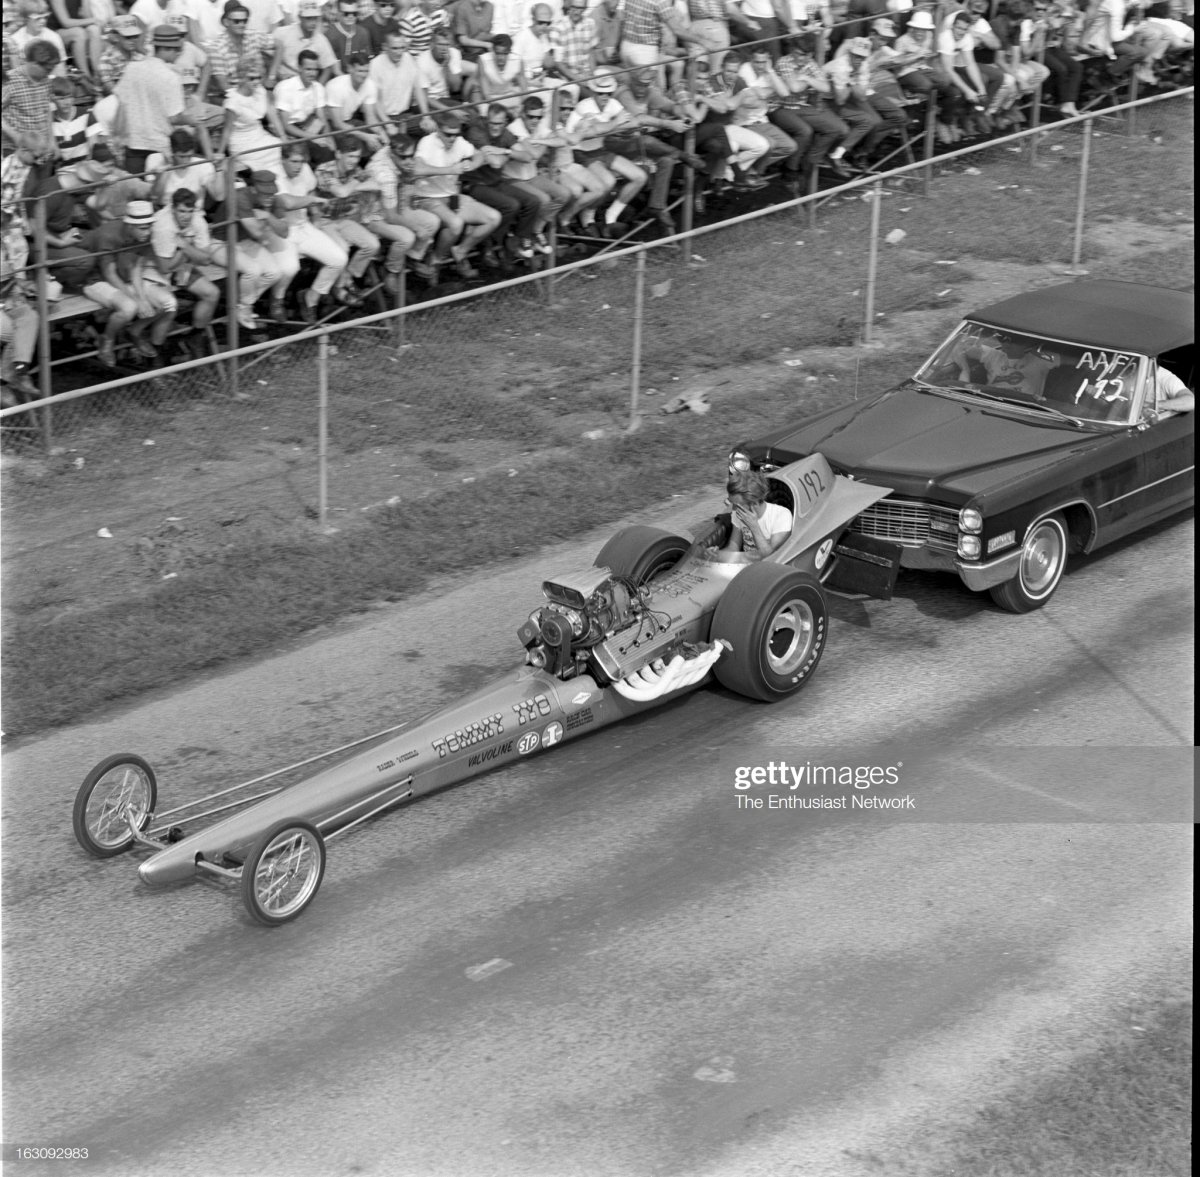 1  Tommy Ivo With Dragster pushed by caddy back to pits.jpg